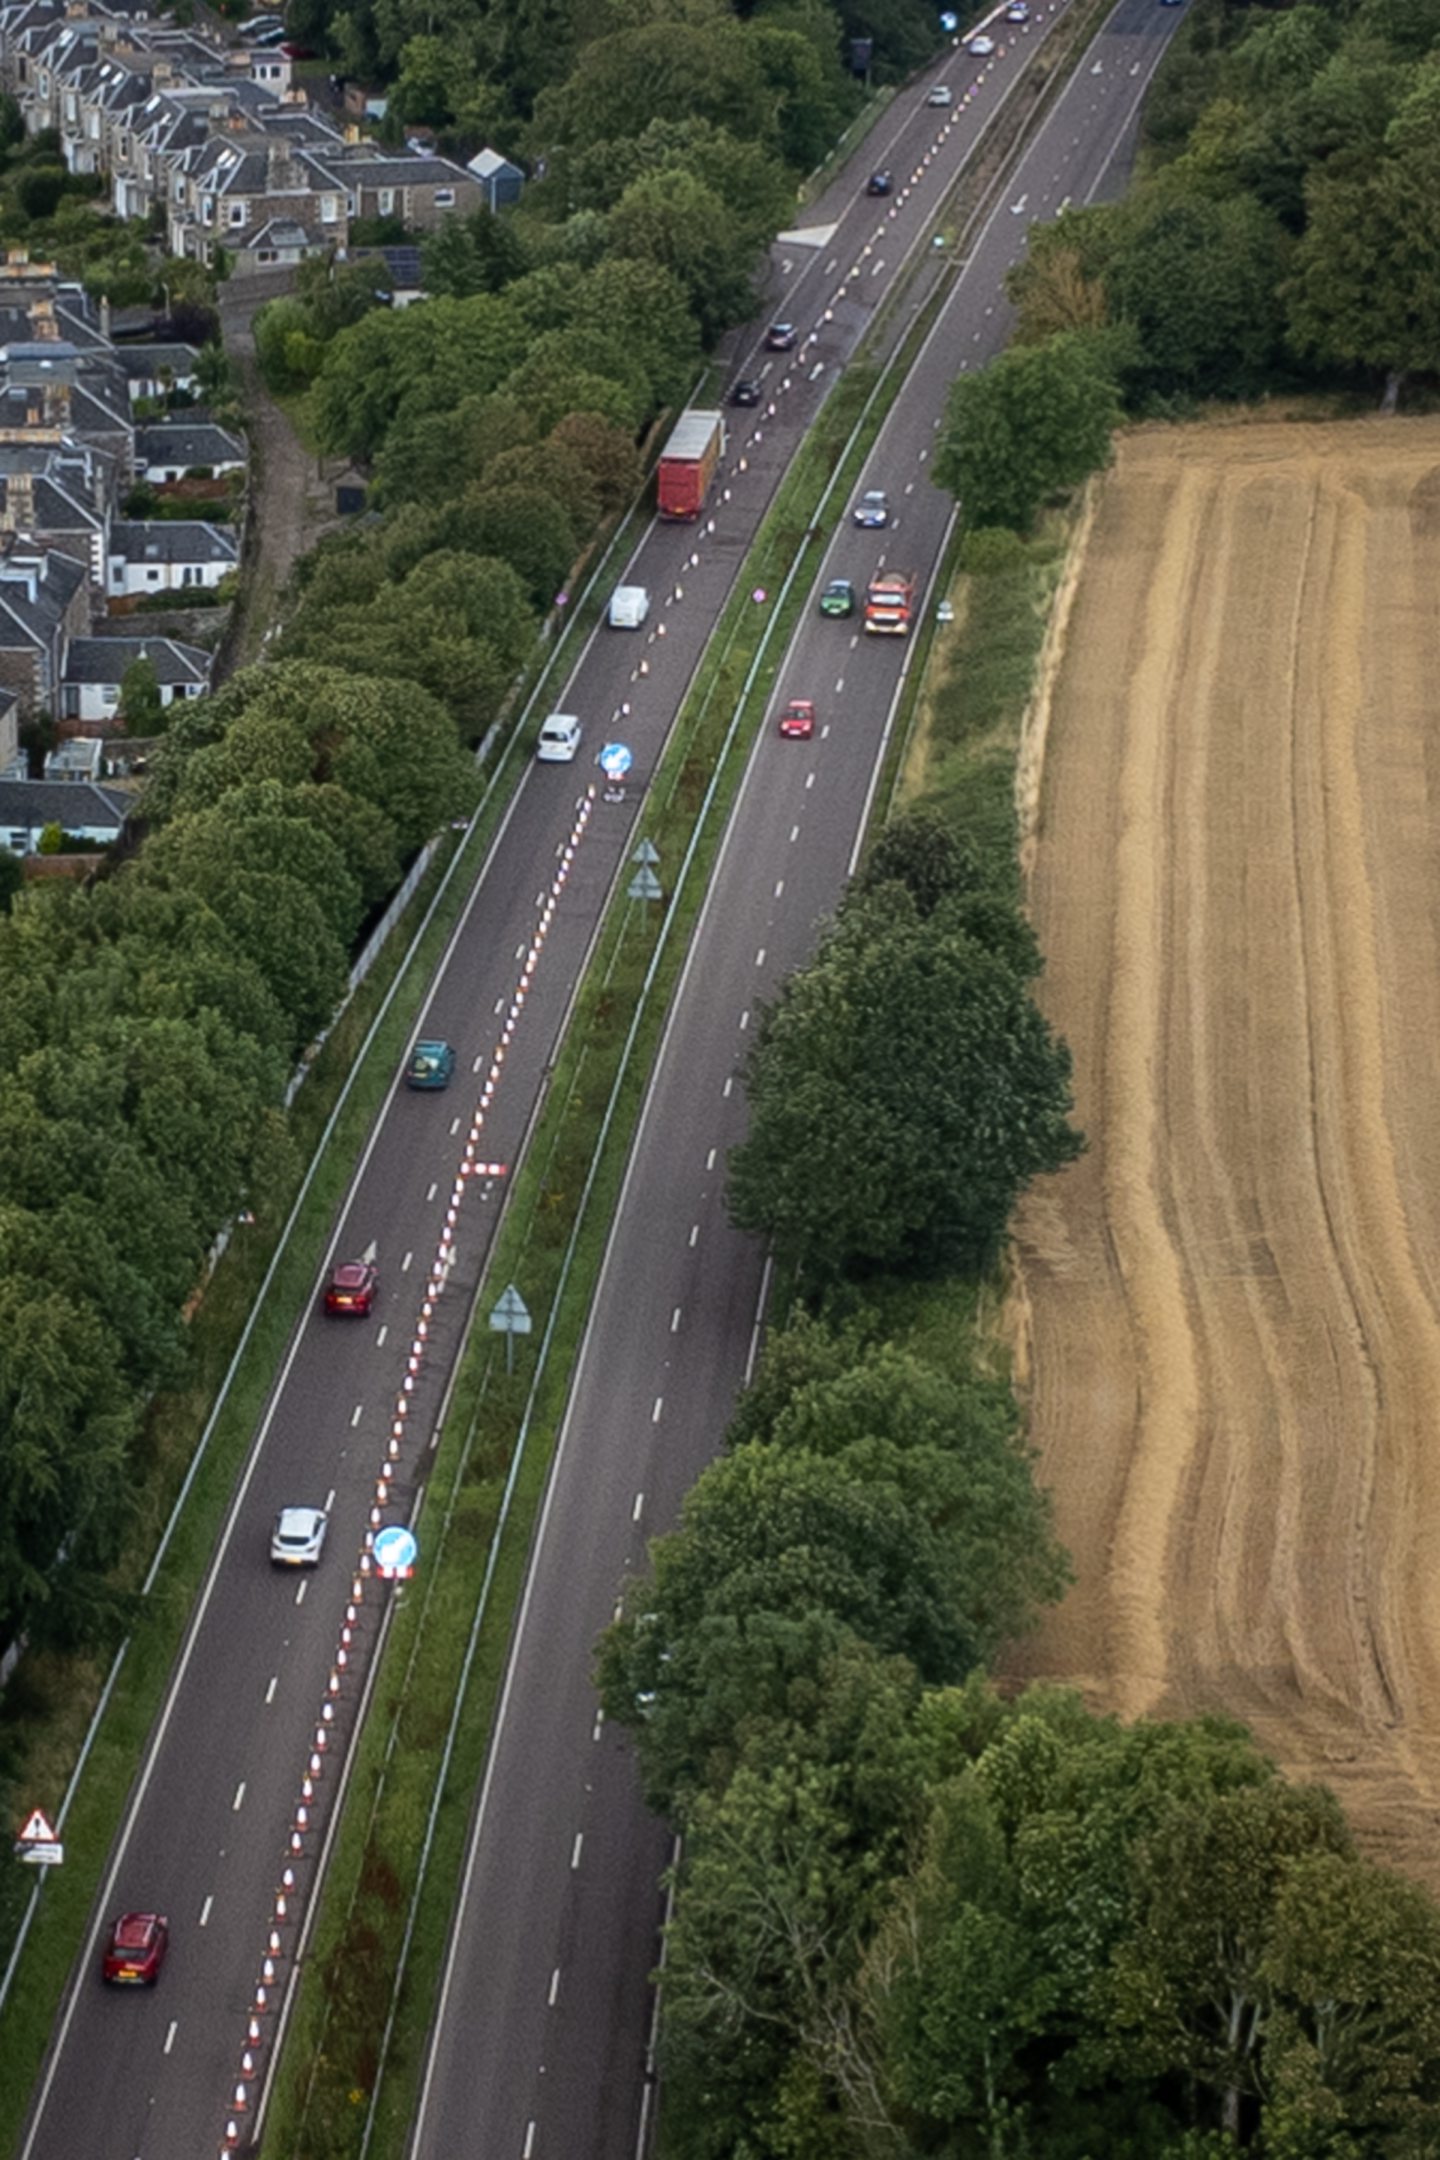 Traffic merging on the A92 approach to Forgan Roundabout